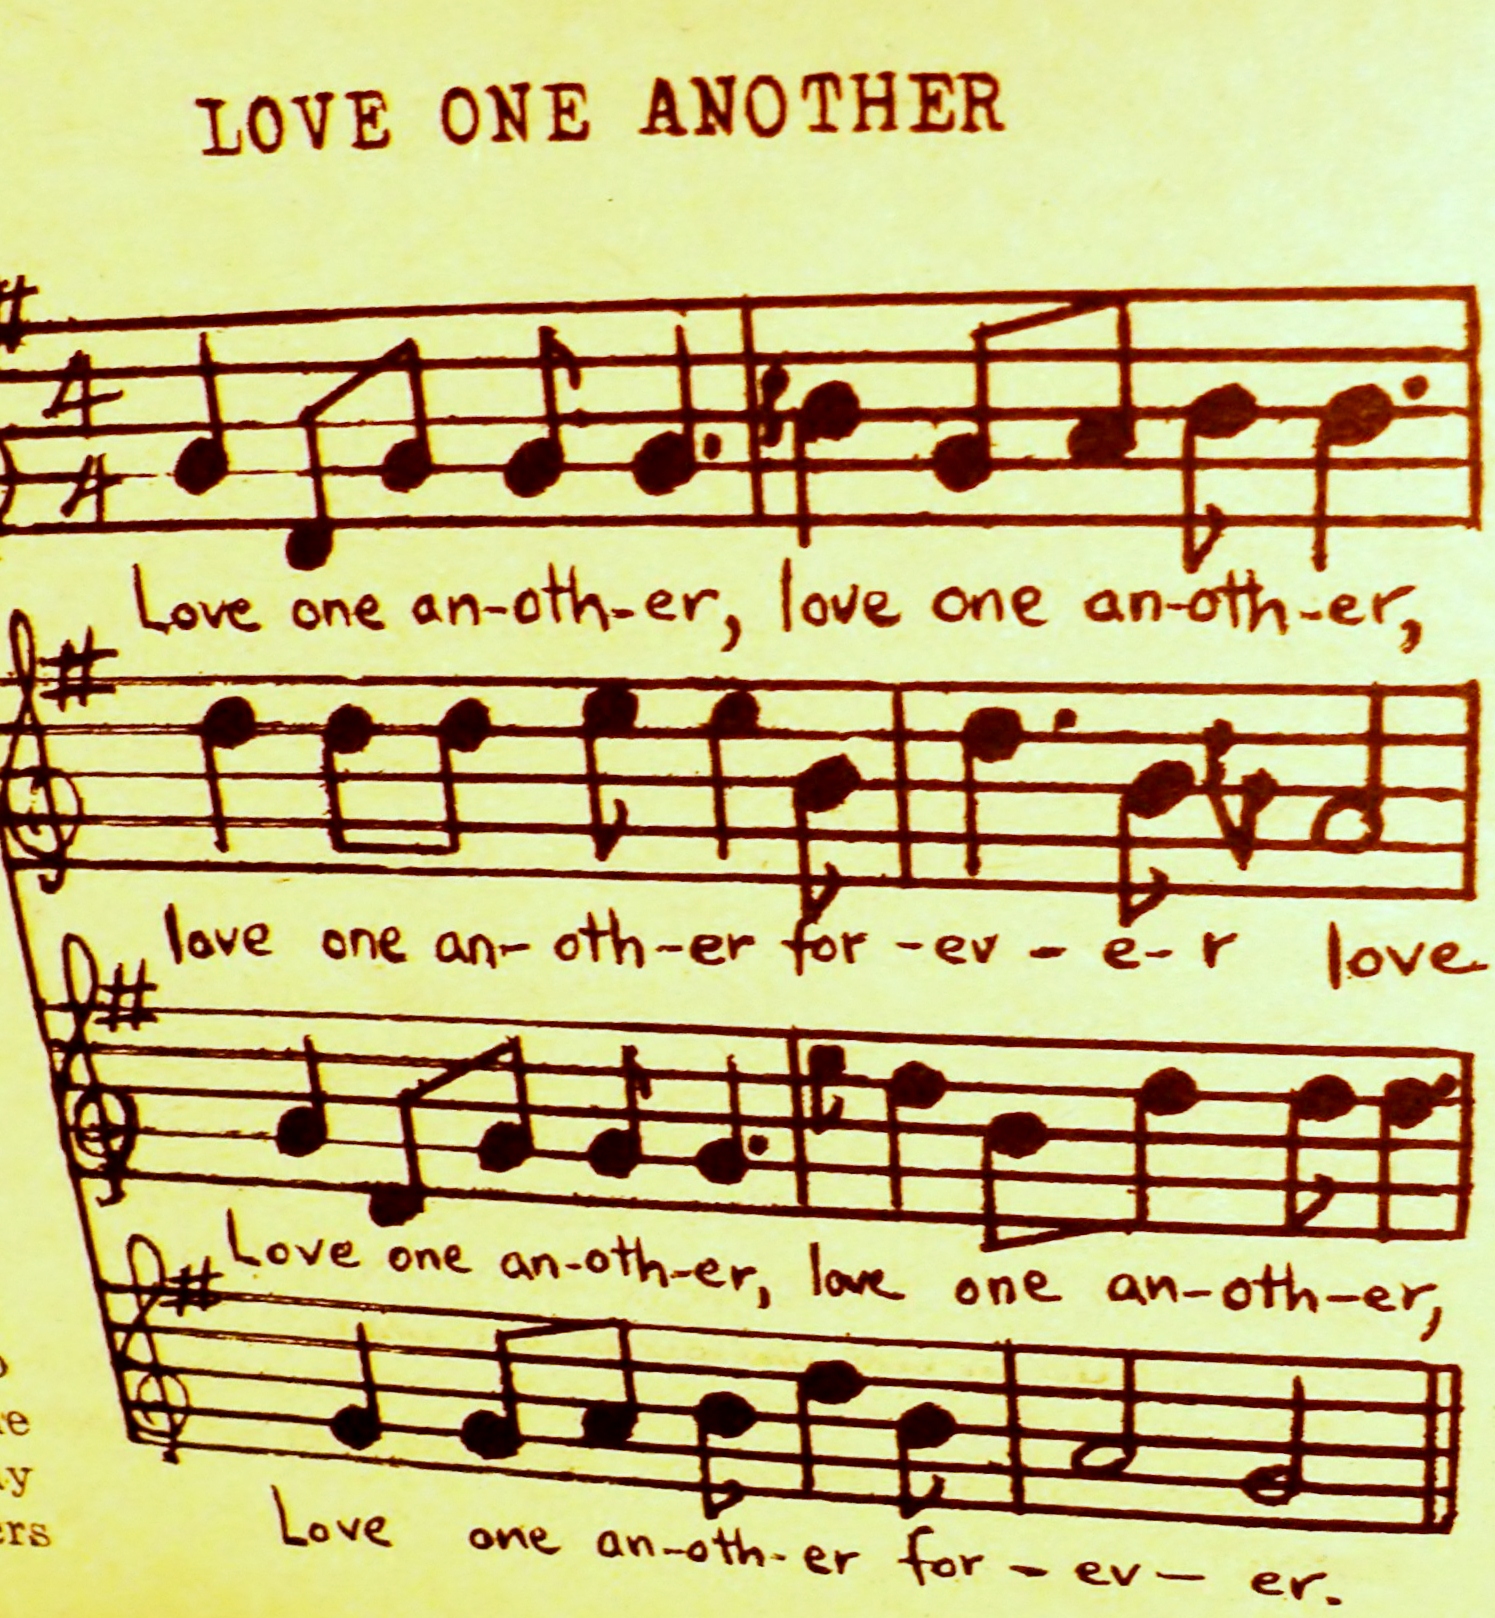 Love One Another - photo.